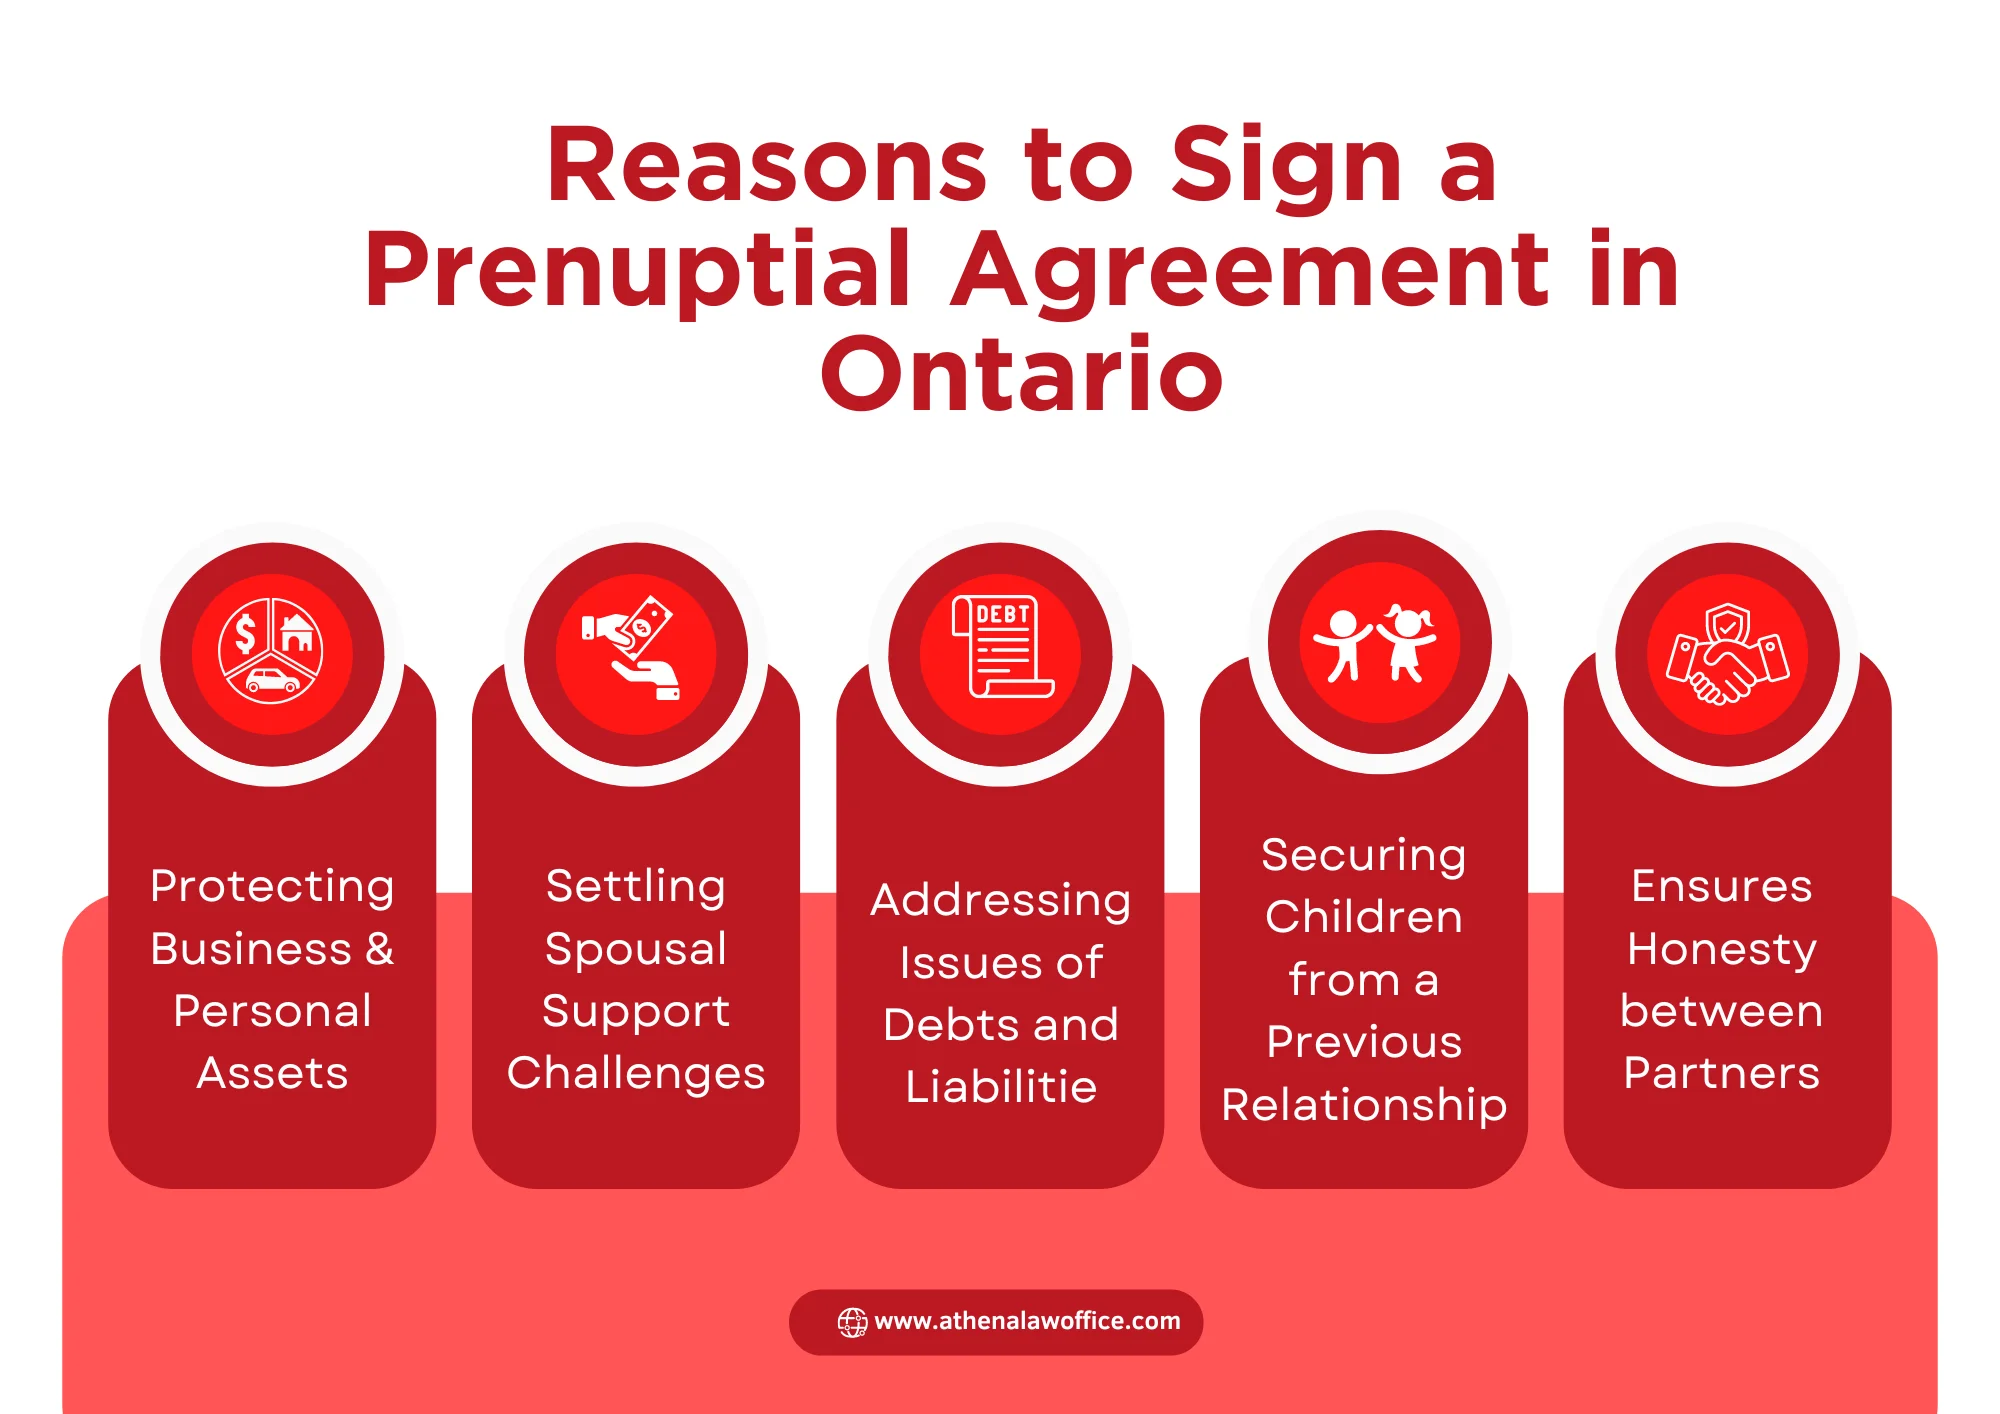 An infographic on the reasons to sign a prenup agreement in Ontario